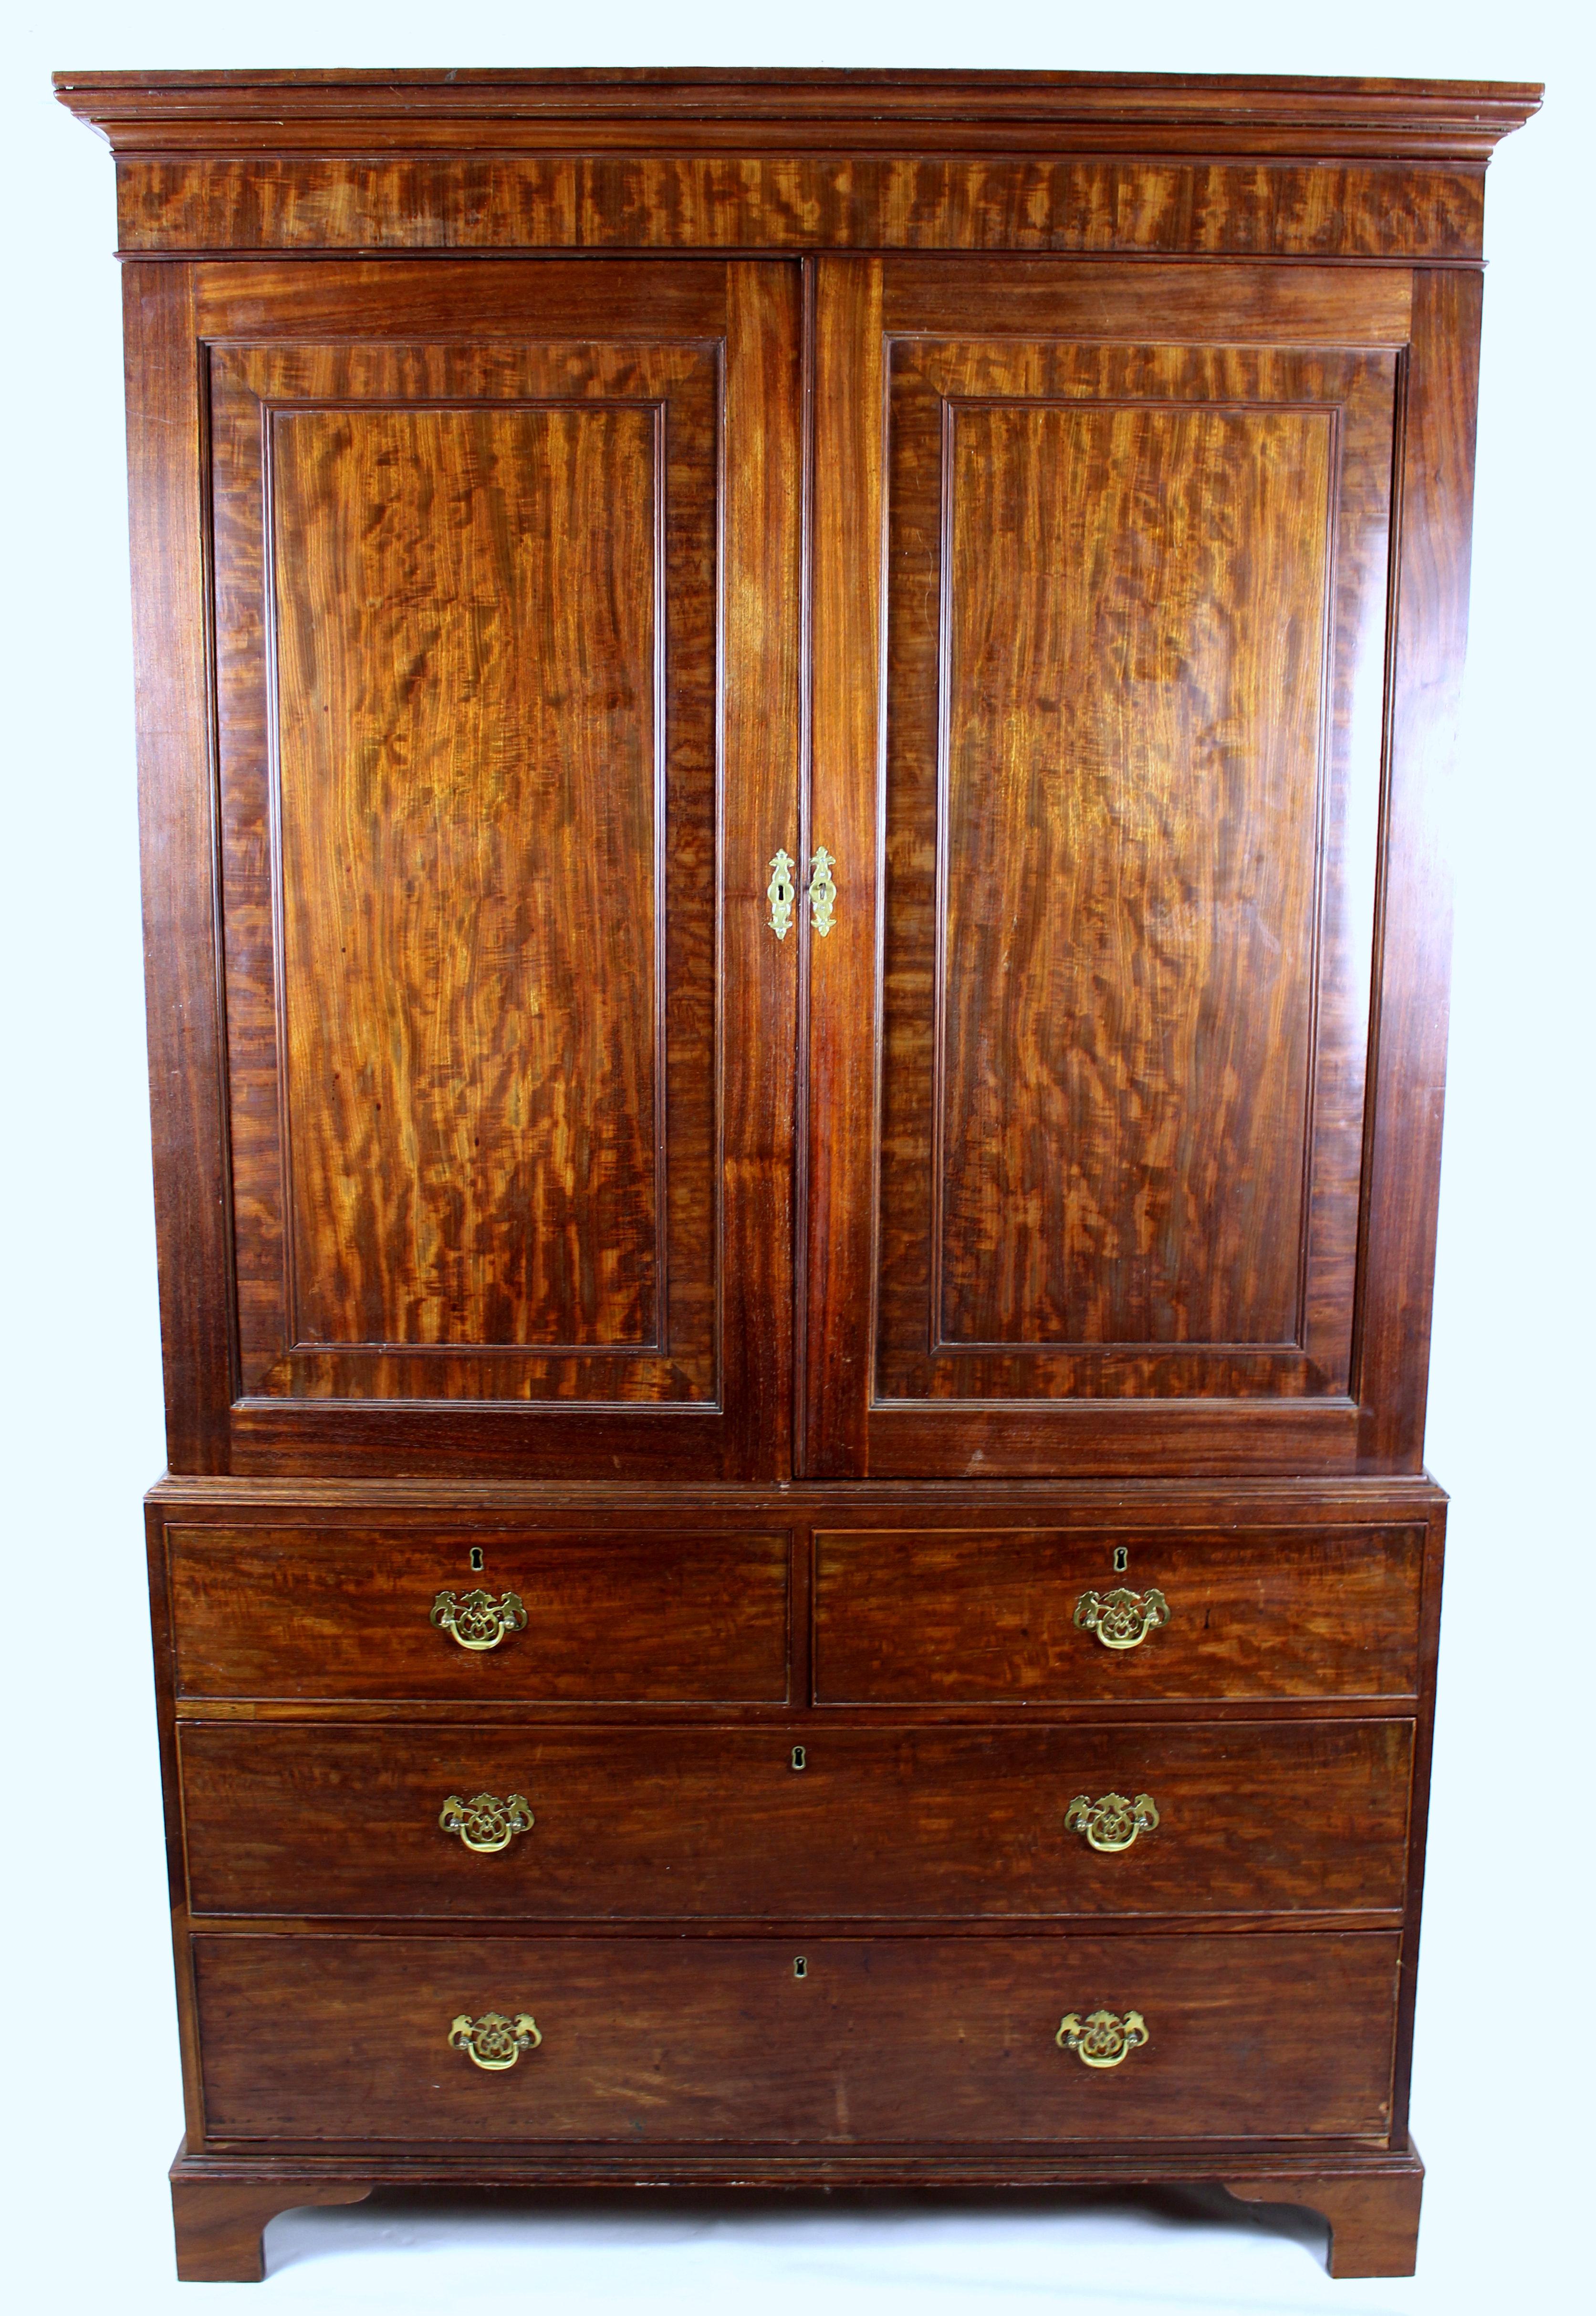 This handsome and well-proportioned George III mahogany linen press features 2 crossbanded panelled doors which reveal a central slide over 2 short and 2 long drawers. The unit also has ornate brass hardware and is supported on bracket feet. It